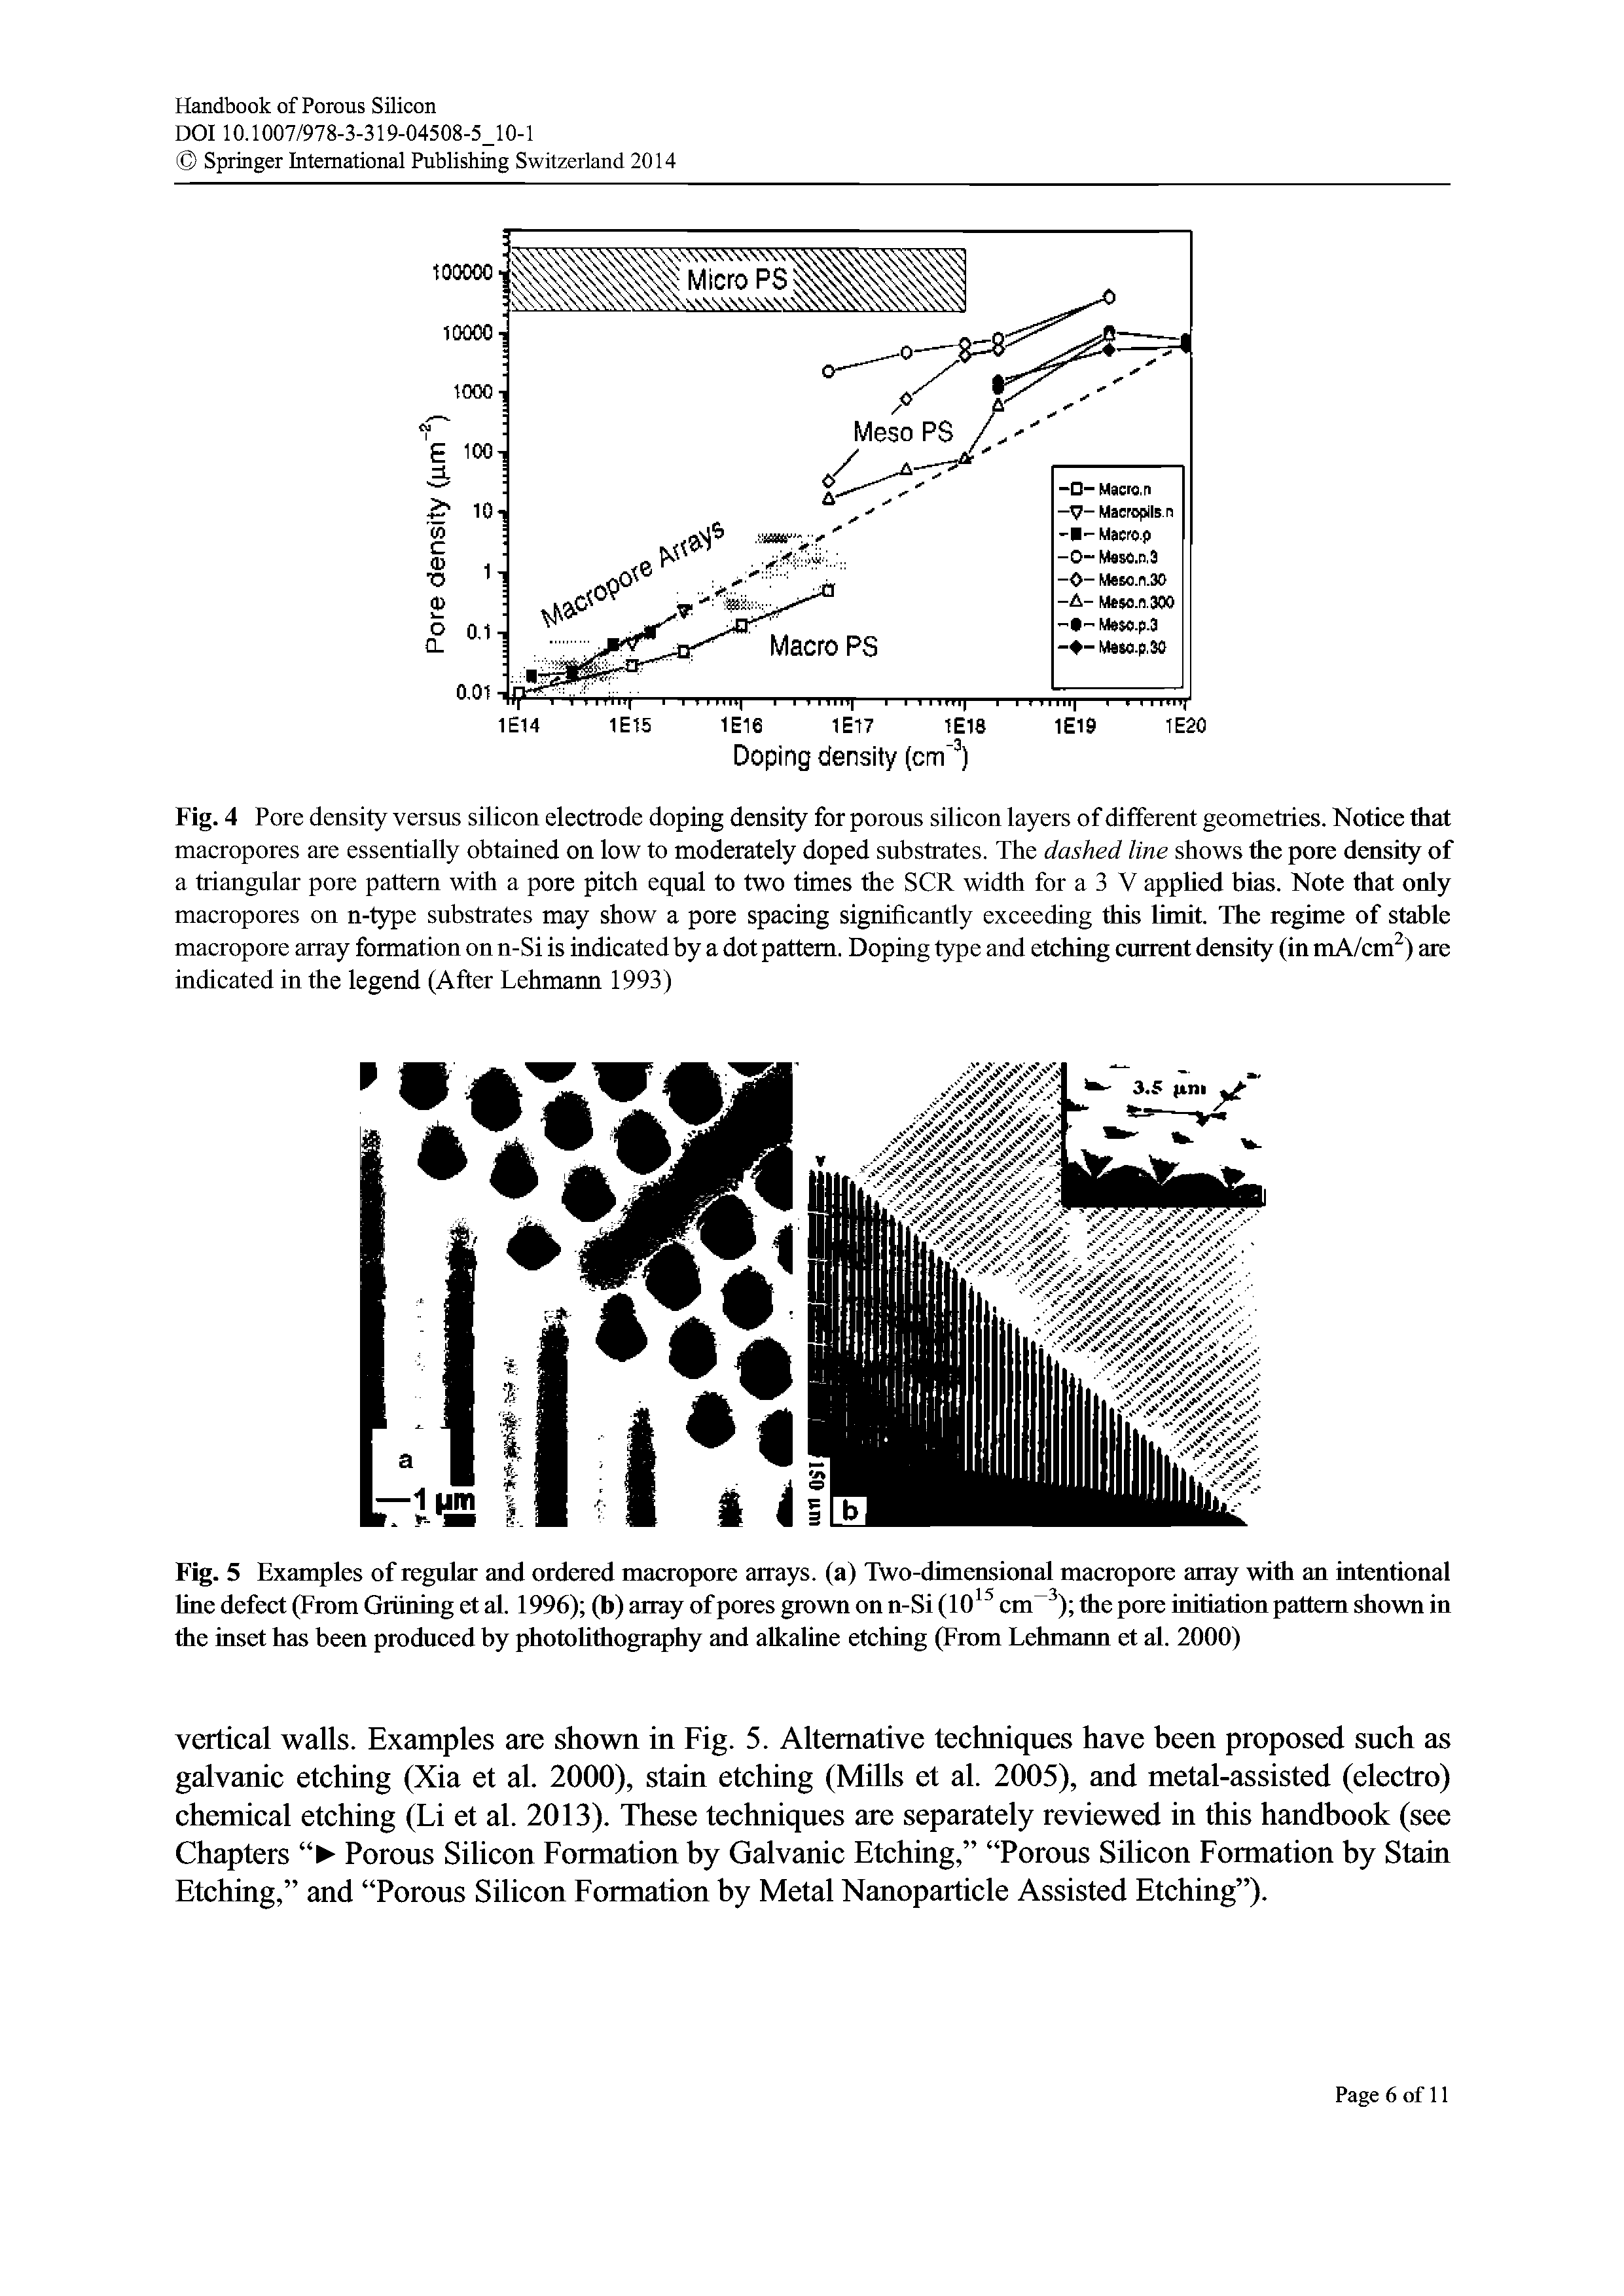 Fig. 4 Pore density versus silicon electrode doping density for porous silicon layers of different geometries. Notice that macropores are essentially obtained on low to moderately doped substrates. The dashed line shows the pore density of a triangular pore pattern with a pore pitch equal to two times the SCR width for a 3 V applied bias. Note that only macropores on n-type substrates may show a pore spacing significantly exceeding this limit. The regime of stable macropore array formation on n-Si is indicated by a dot pattern. Doping type and etching current density (in mA/cm ) are indicated in the legend (After Lehmann 1993)...